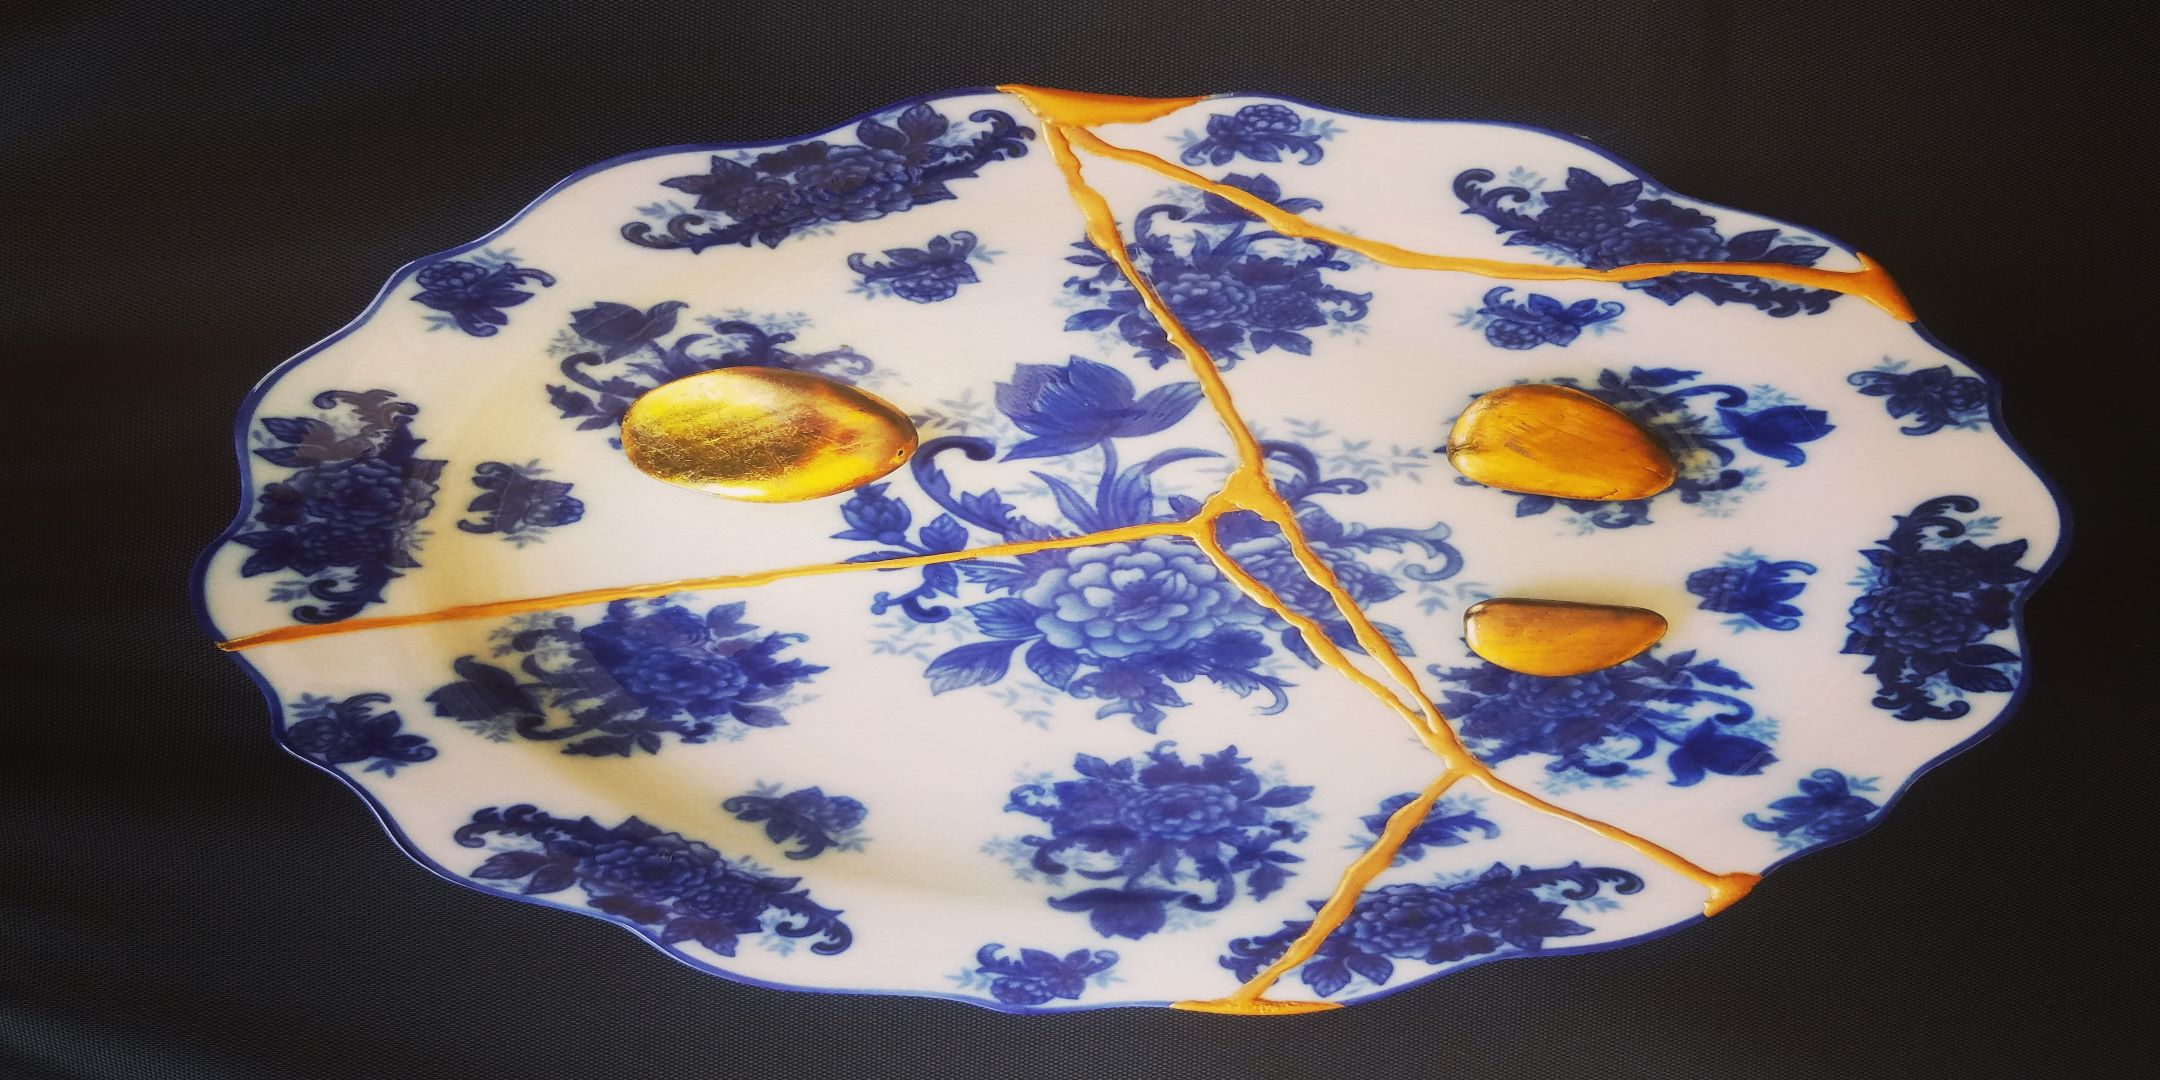 Kintsugi Pottery: Mending Imperfection with Gold